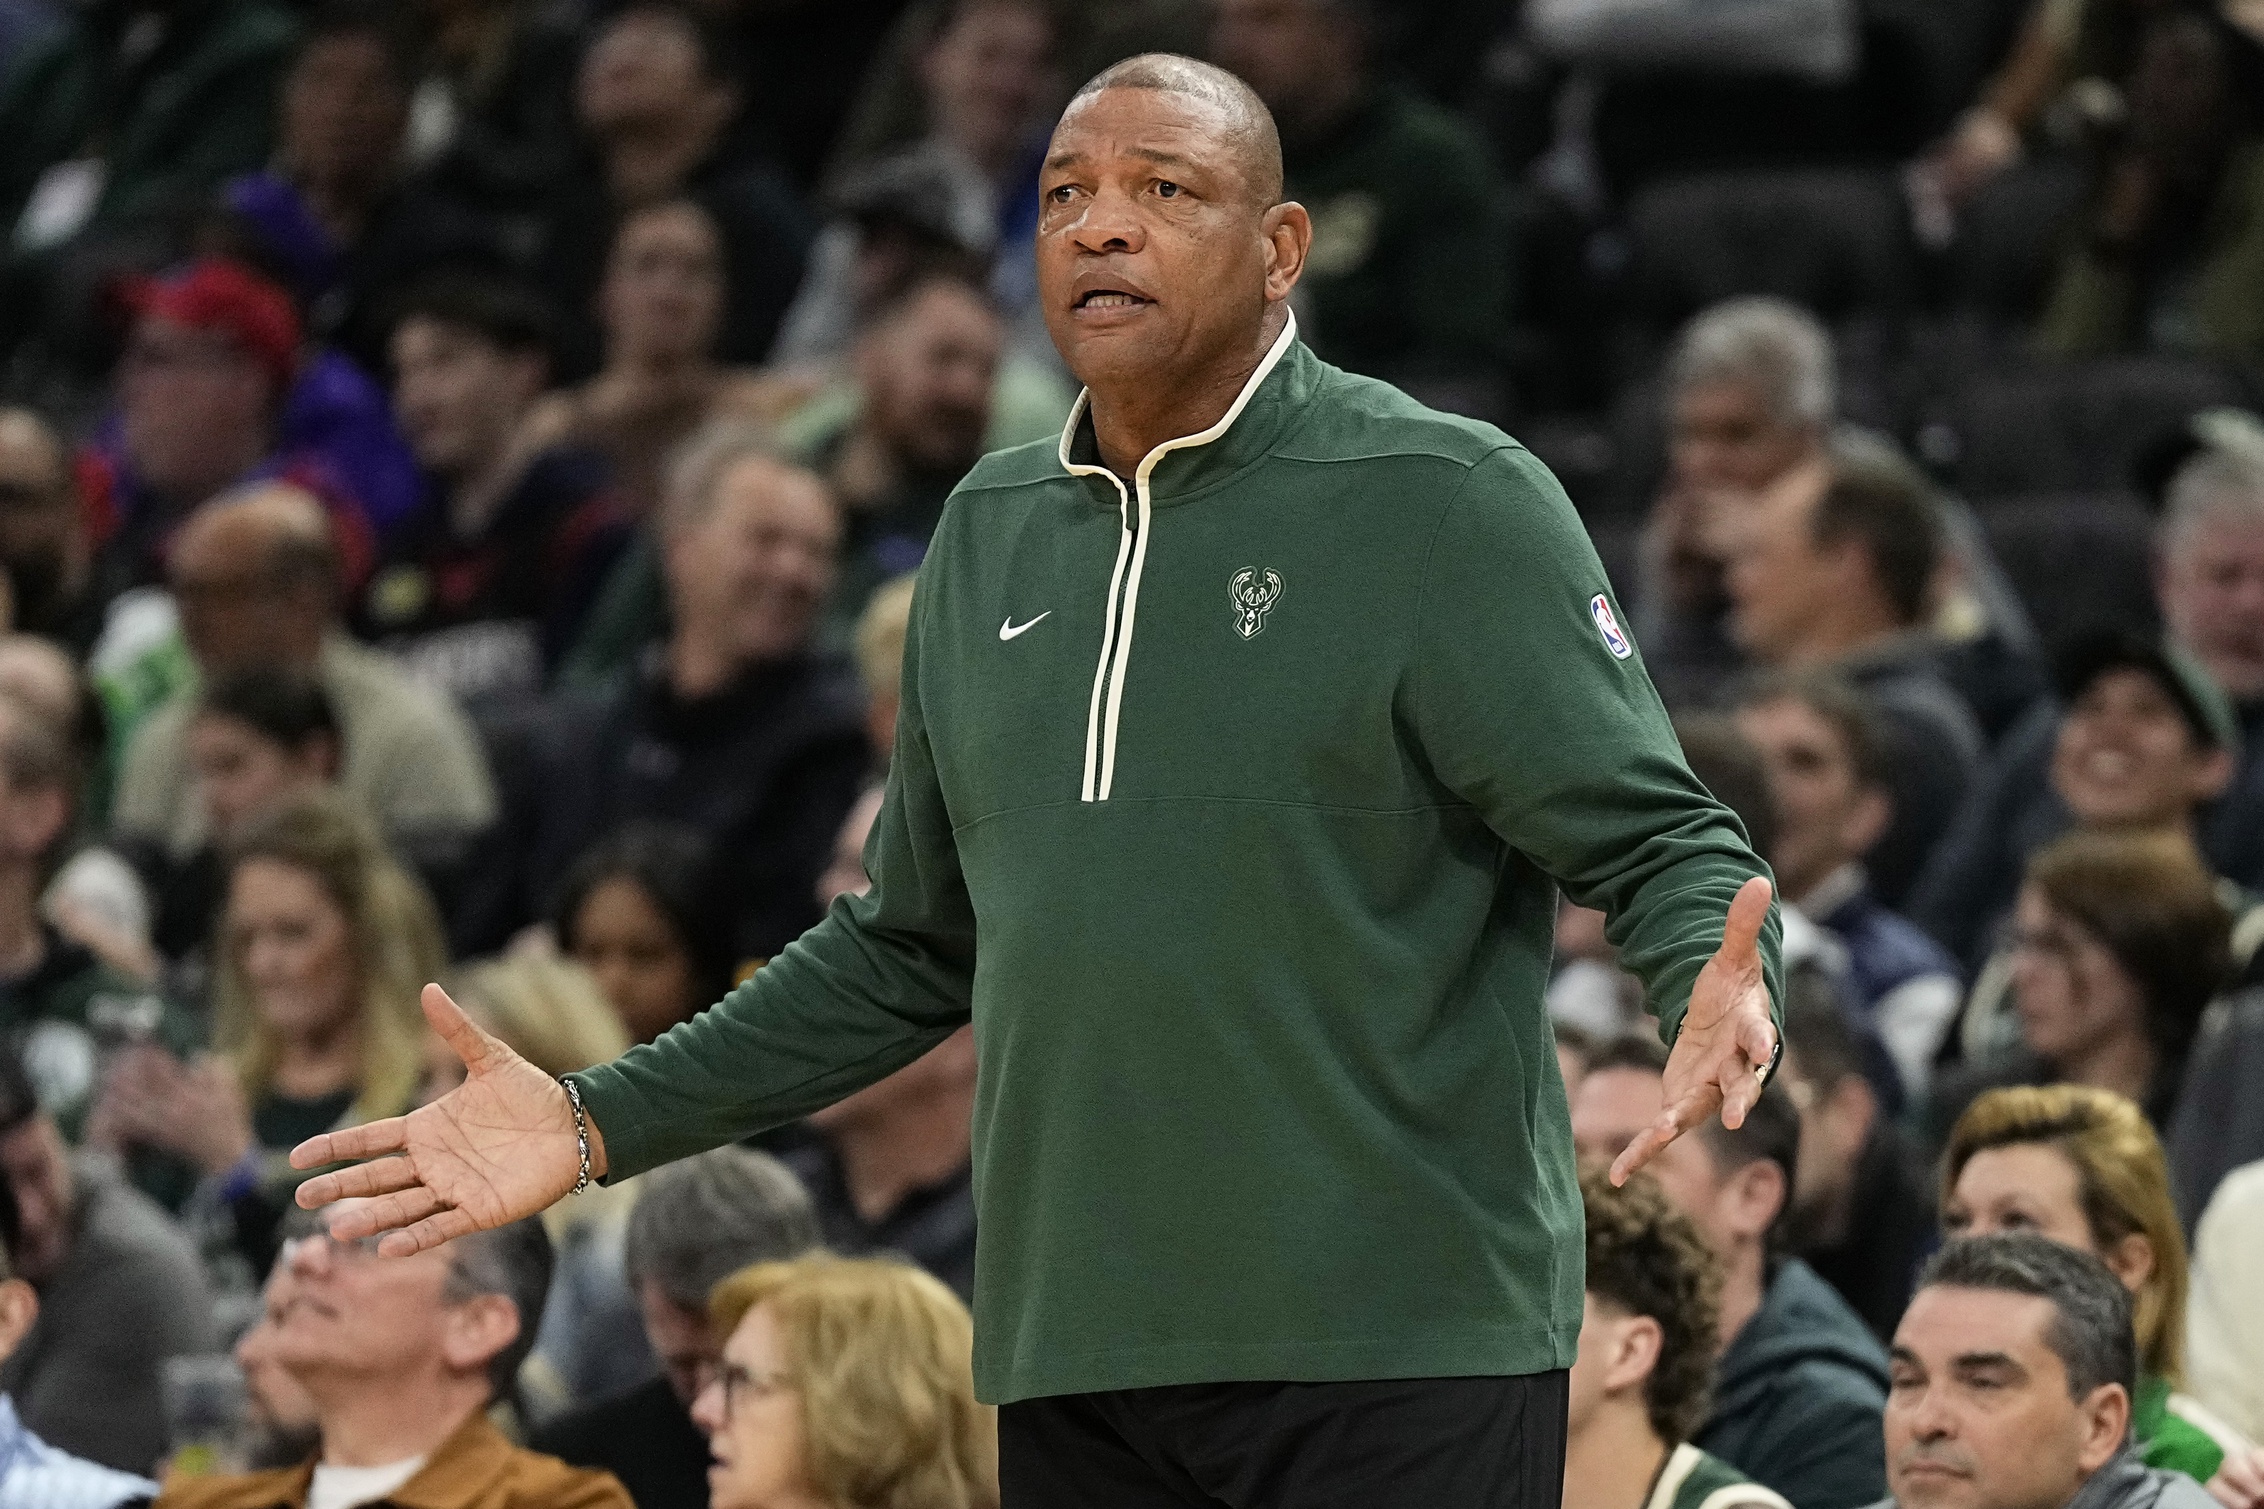 Milwaukee Bucks head coach Doc Rivers reacts to a call during the first quarter against the Philadelphia 76ers